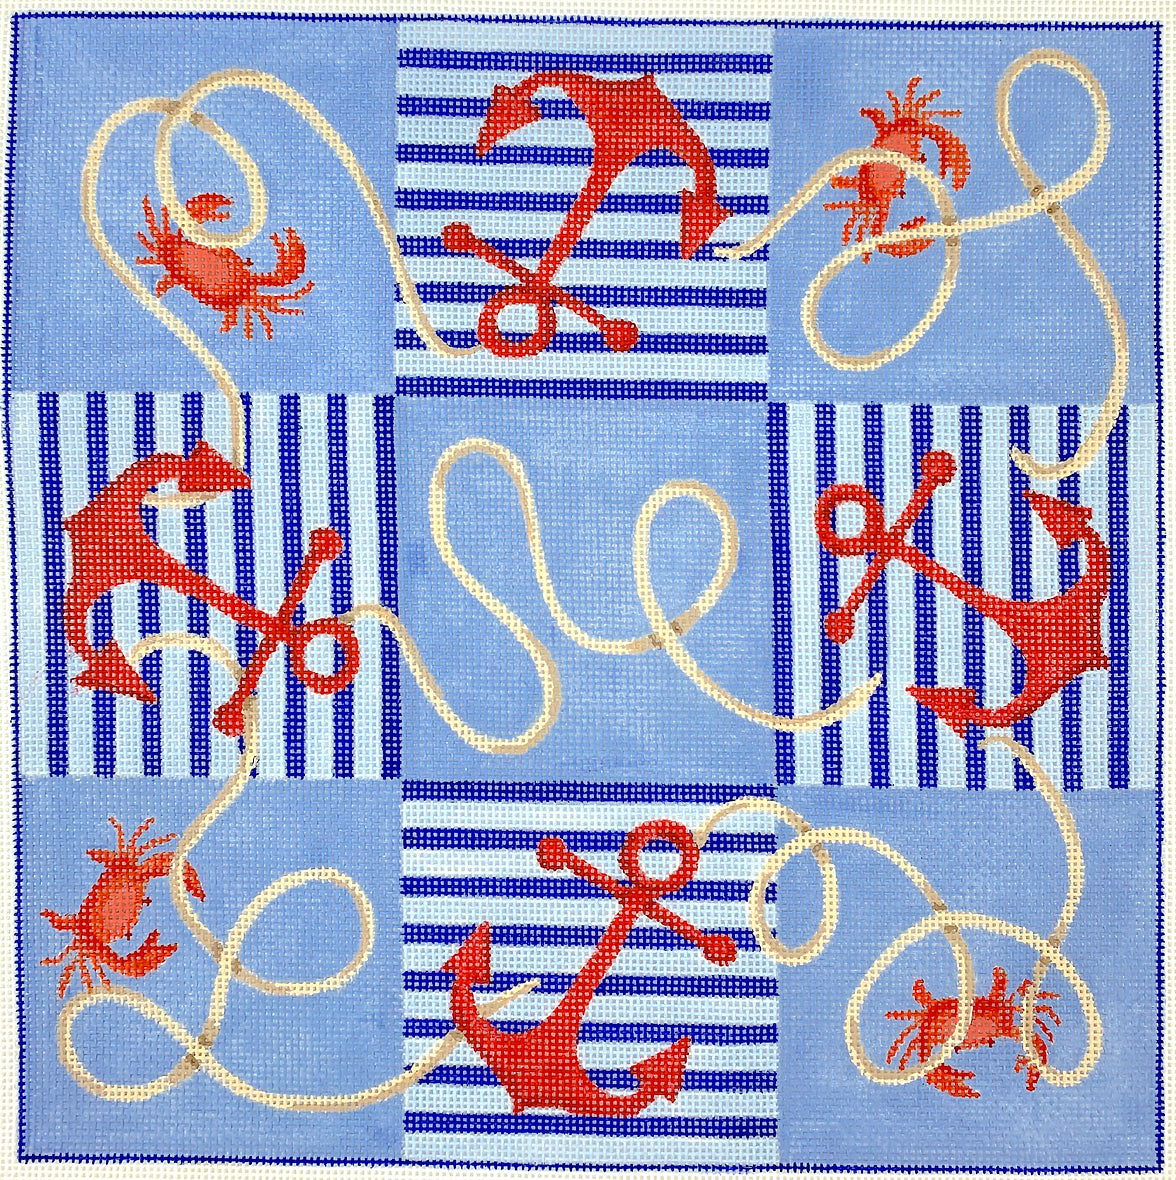 Kate Dickerson TTT-02 Tic Tac Toe Board - Nautical Anchors and Rope w/ Crabs